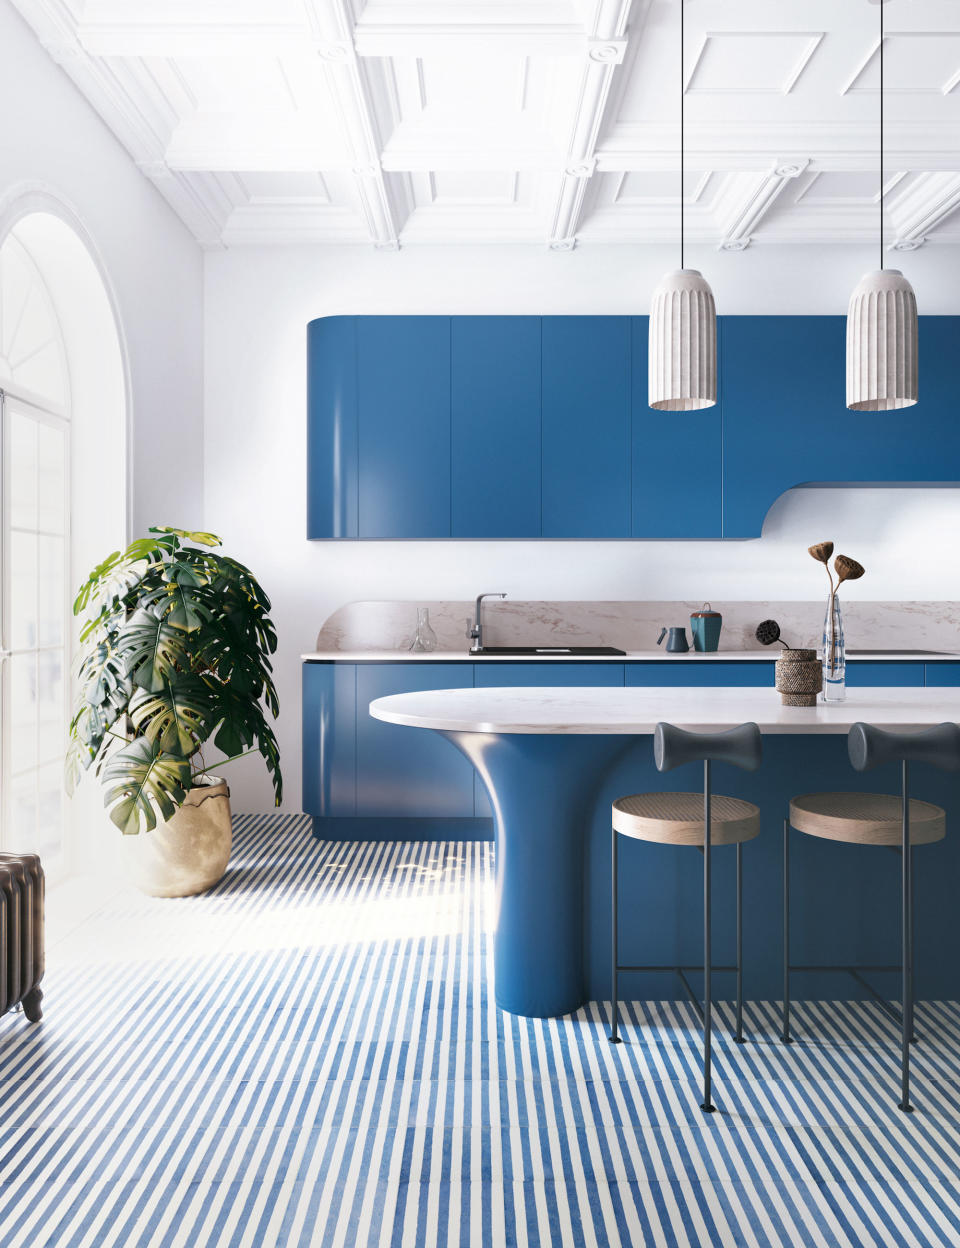 <p> Blue kitchen ideas are a tried-and-tested color pairing that works beautiful in both country and modern kitchens.  </p> <p> Blue room ideas are perfectly suited to kitchens. It may be bold but this deep blue tone is timeless and simple to use. This shade sits happily with other hues of the color for a harmonious, layered look and is beautifully offset with pale tones and warm neutrals, as well as stark white or black.  </p> <p> Think about incorporating rough, touch finishes, too. Schemes with intense, solid color demand texture, like raw wood, battered metal, distressed paintwork and linen to introduce a laid-back element. </p>